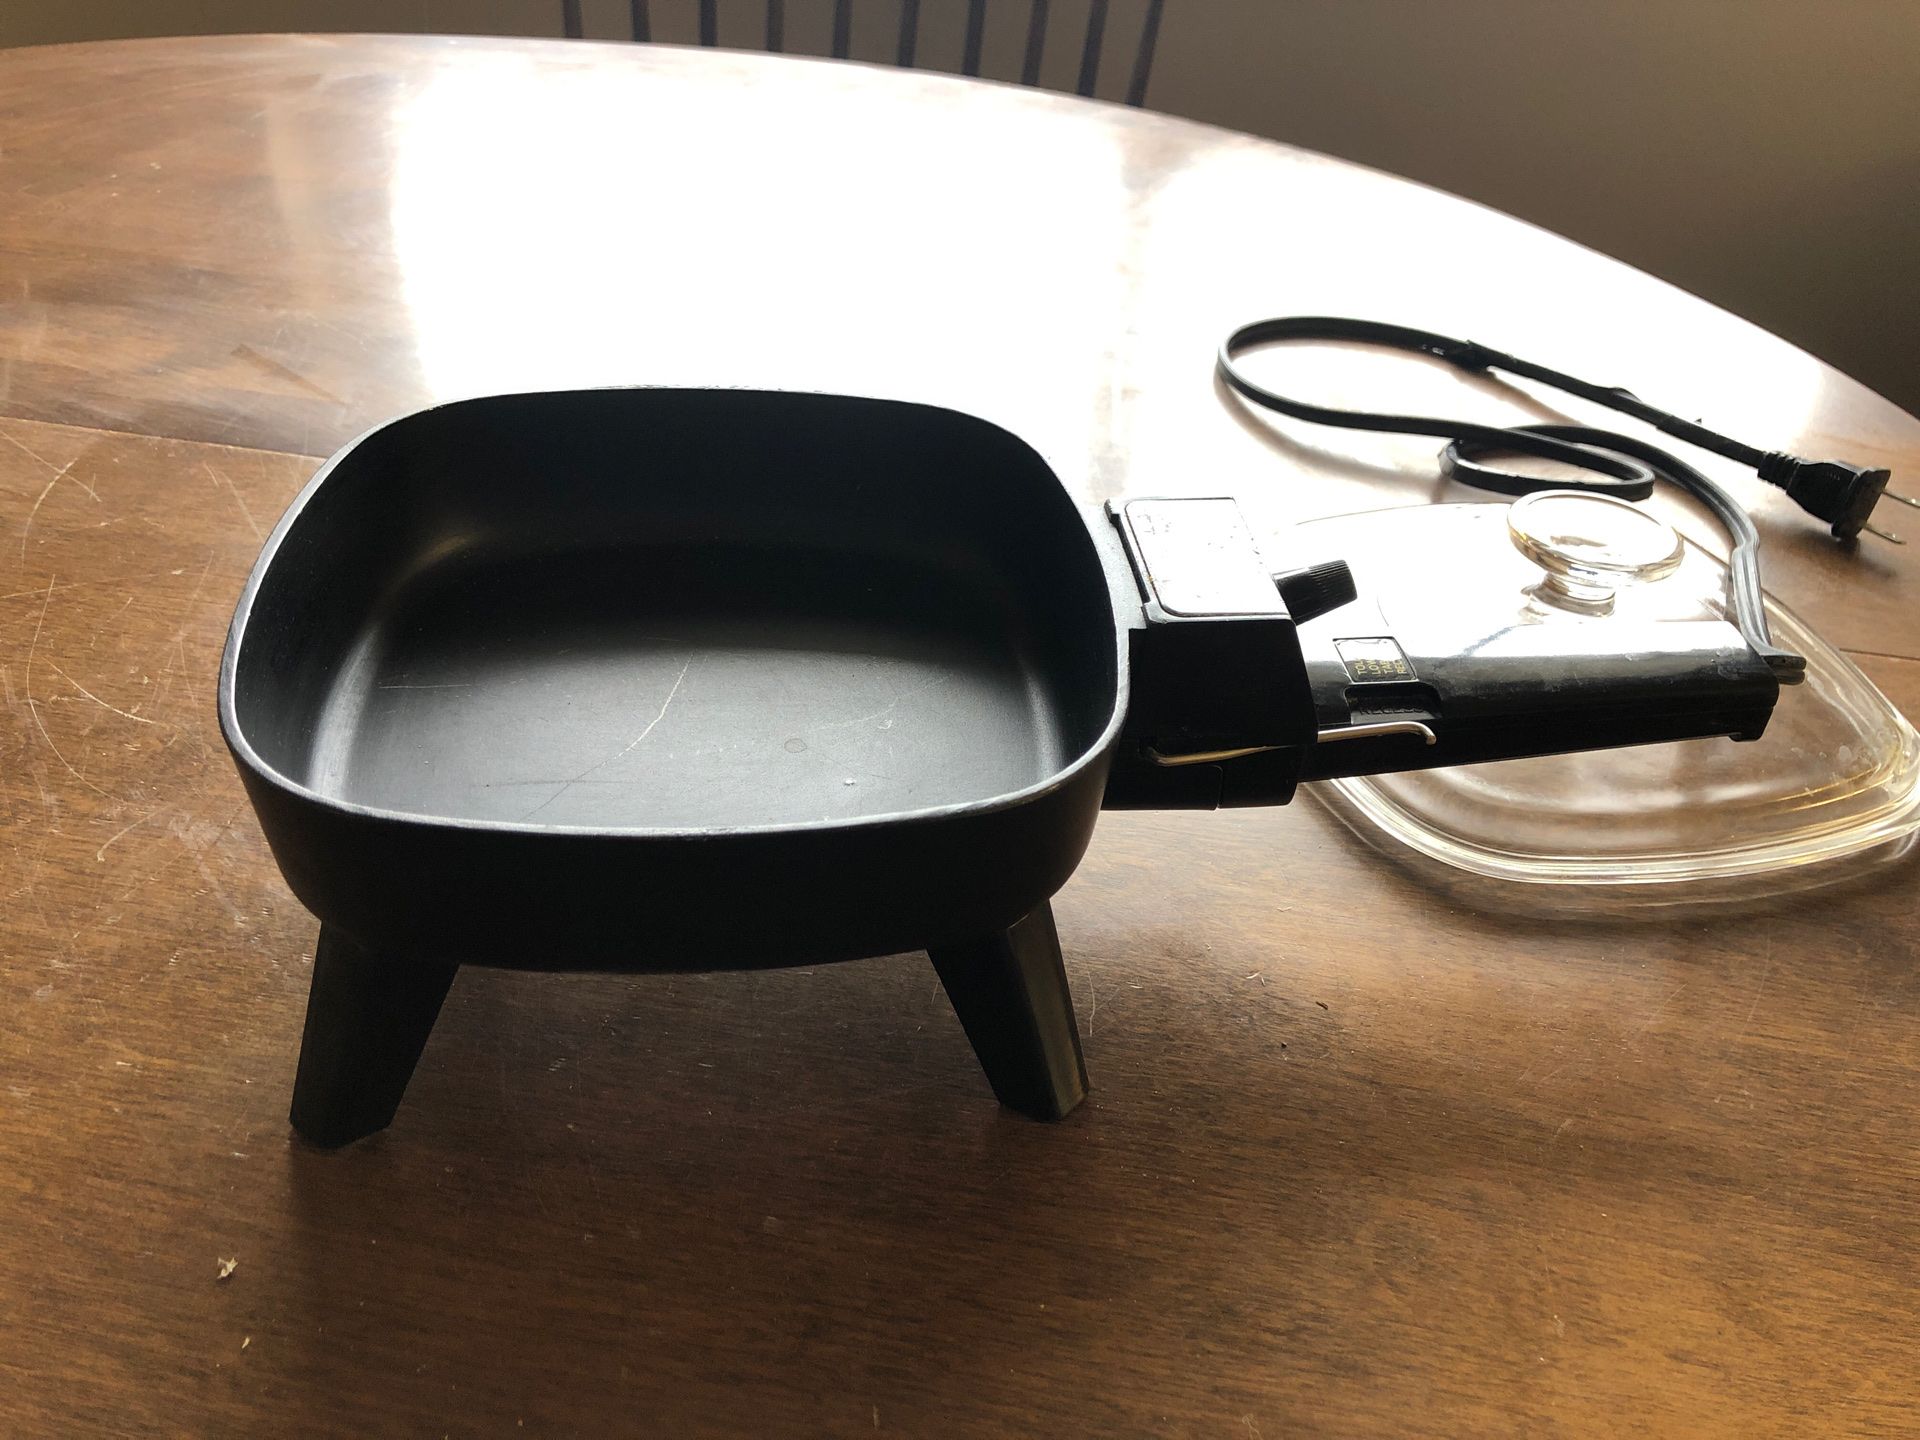 Small electric griddle